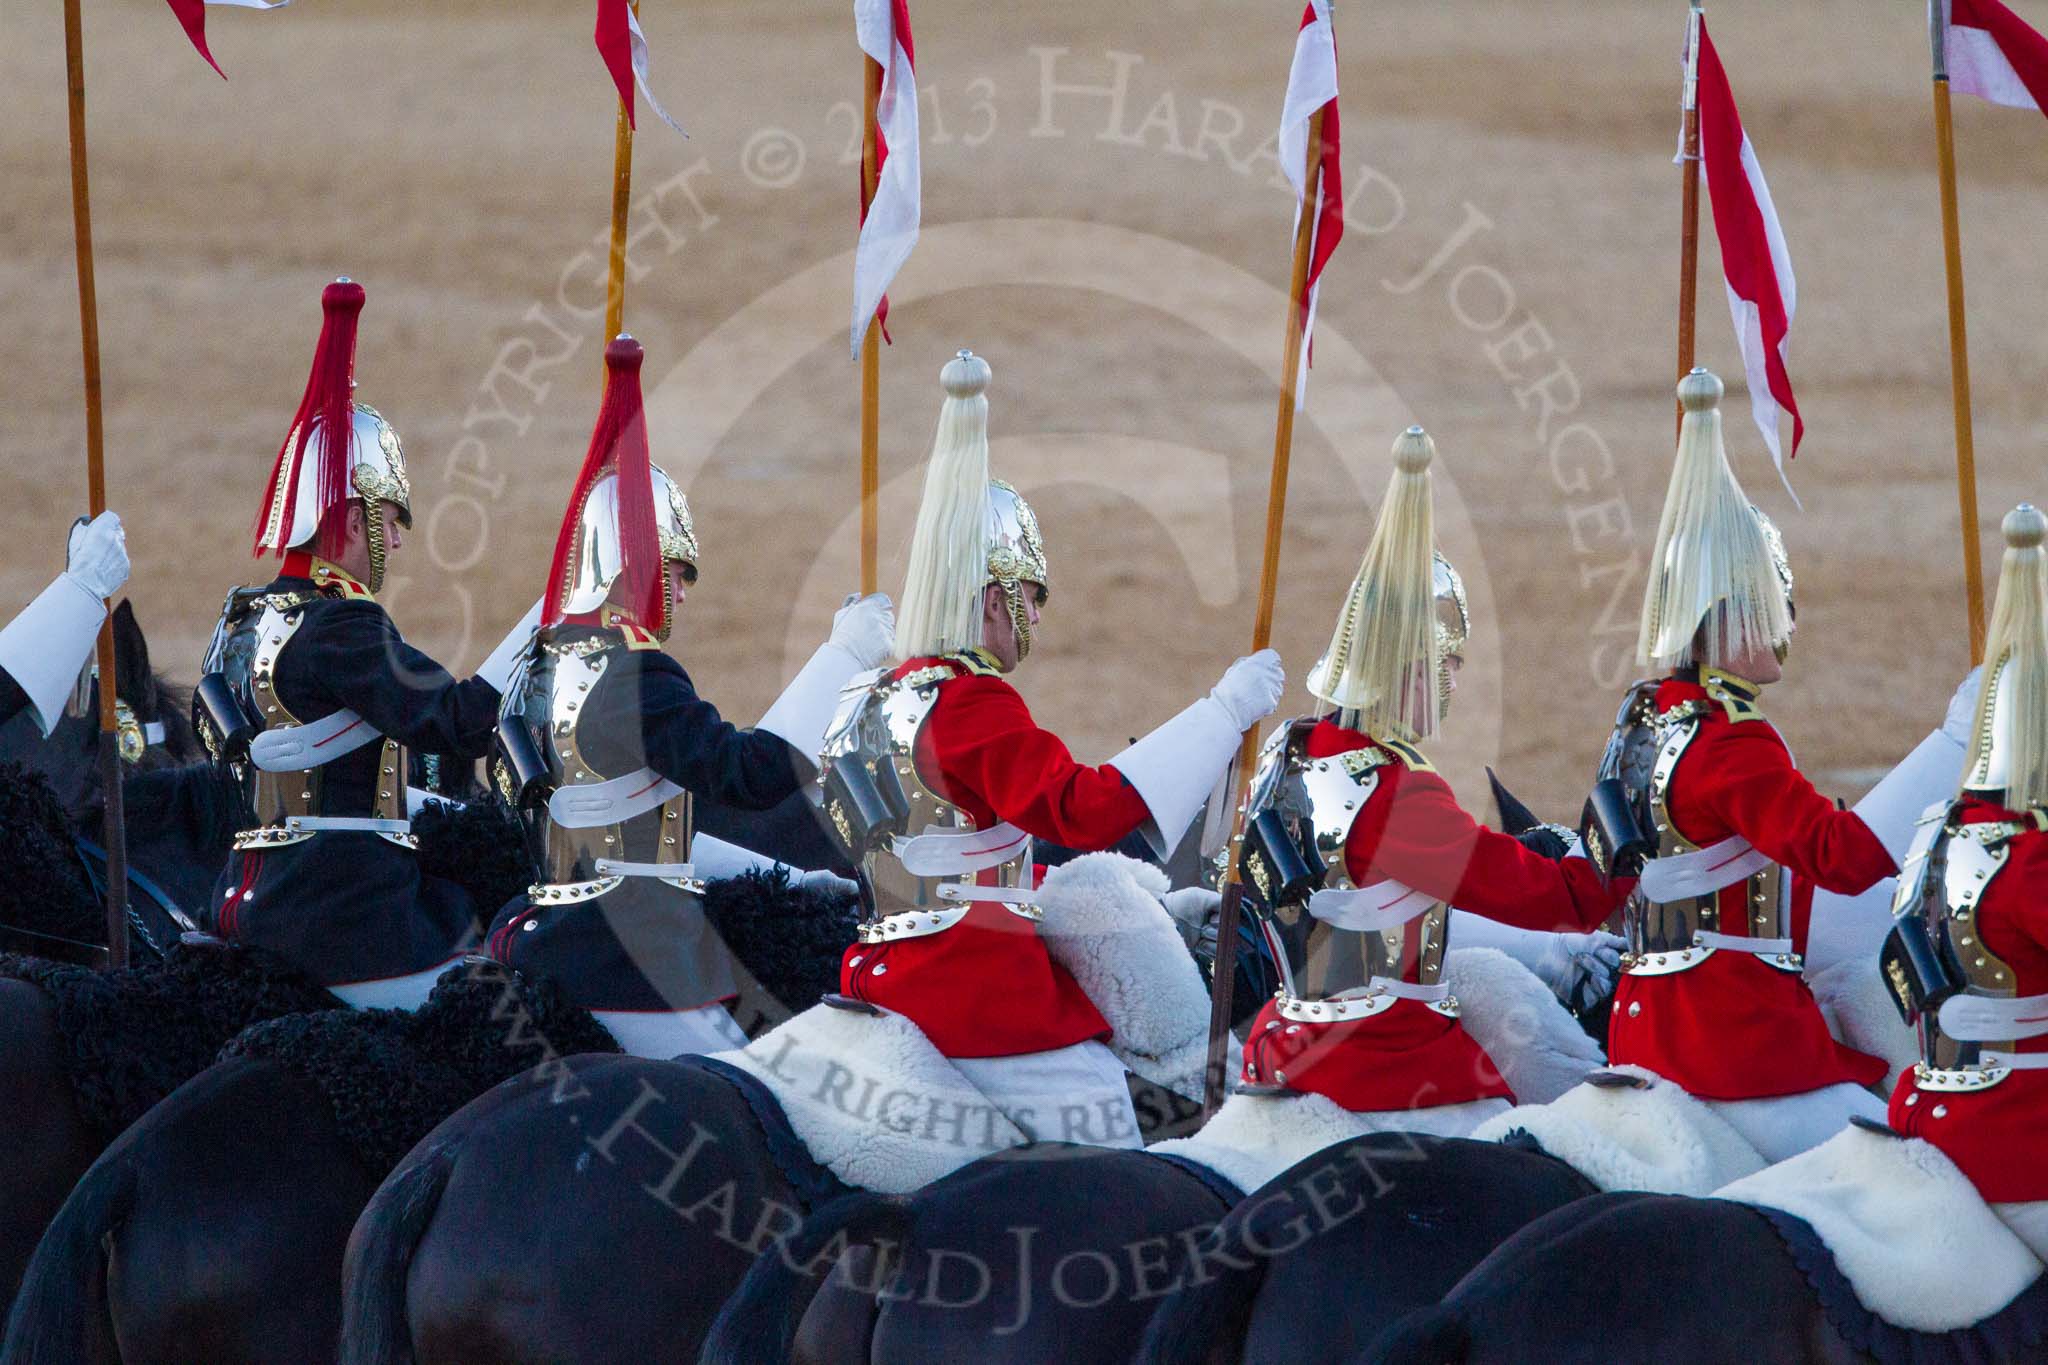 Beating Retreat 2015 - Waterloo 200.
Horse Guards Parade, Westminster,
London,

United Kingdom,
on 10 June 2015 at 20:55, image #224